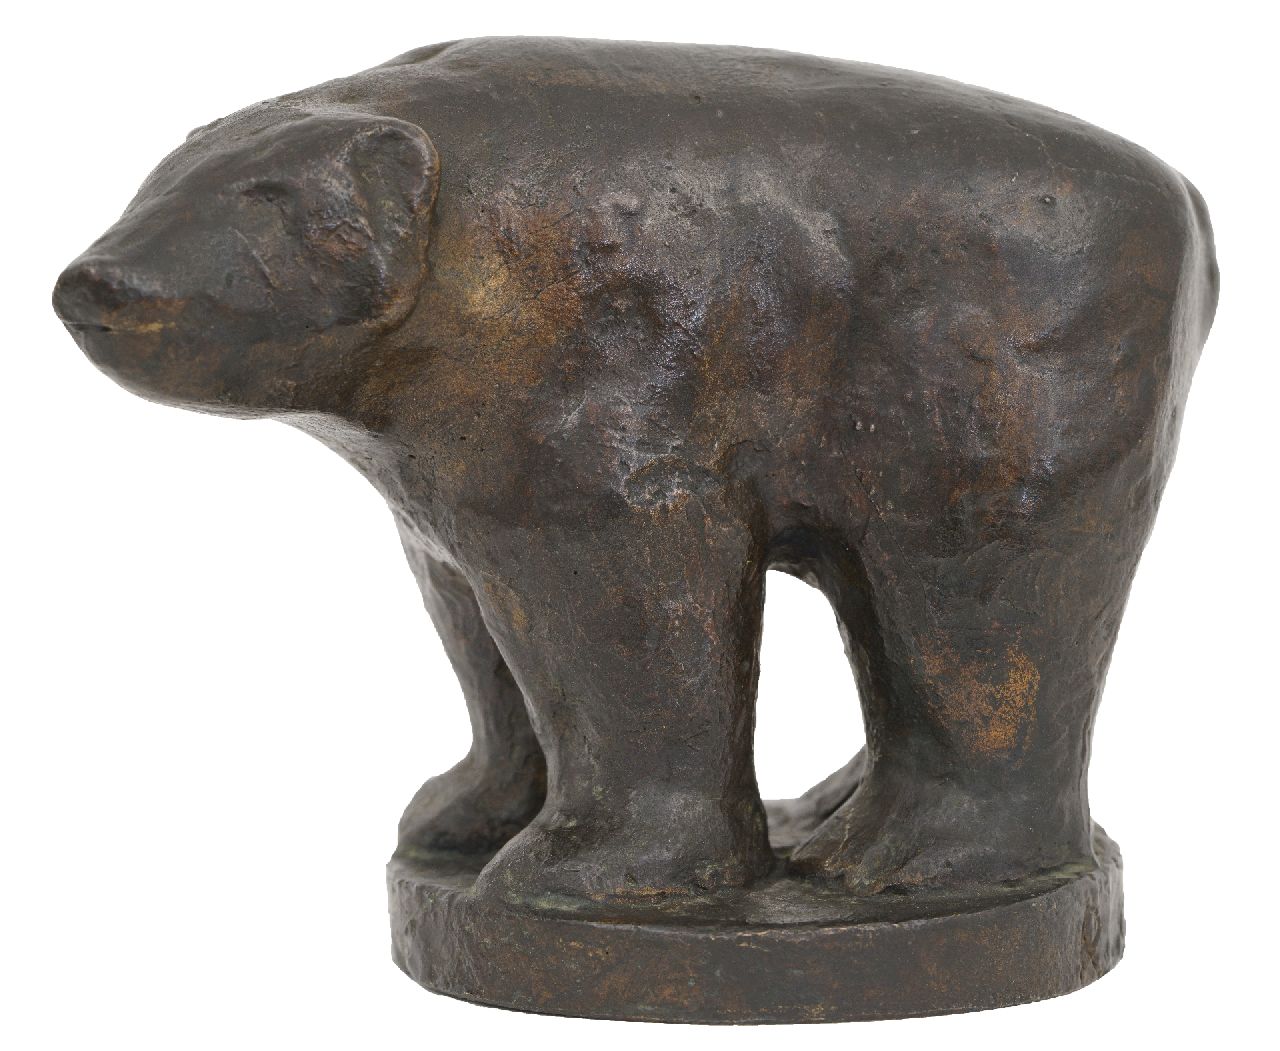 Baisch R.C.  | Rudolf Christian Baisch | Sculptures and objects offered for sale | A bear, bronze 9.3 x 11.8 cm, signed along the lower edge and executed circa 1975